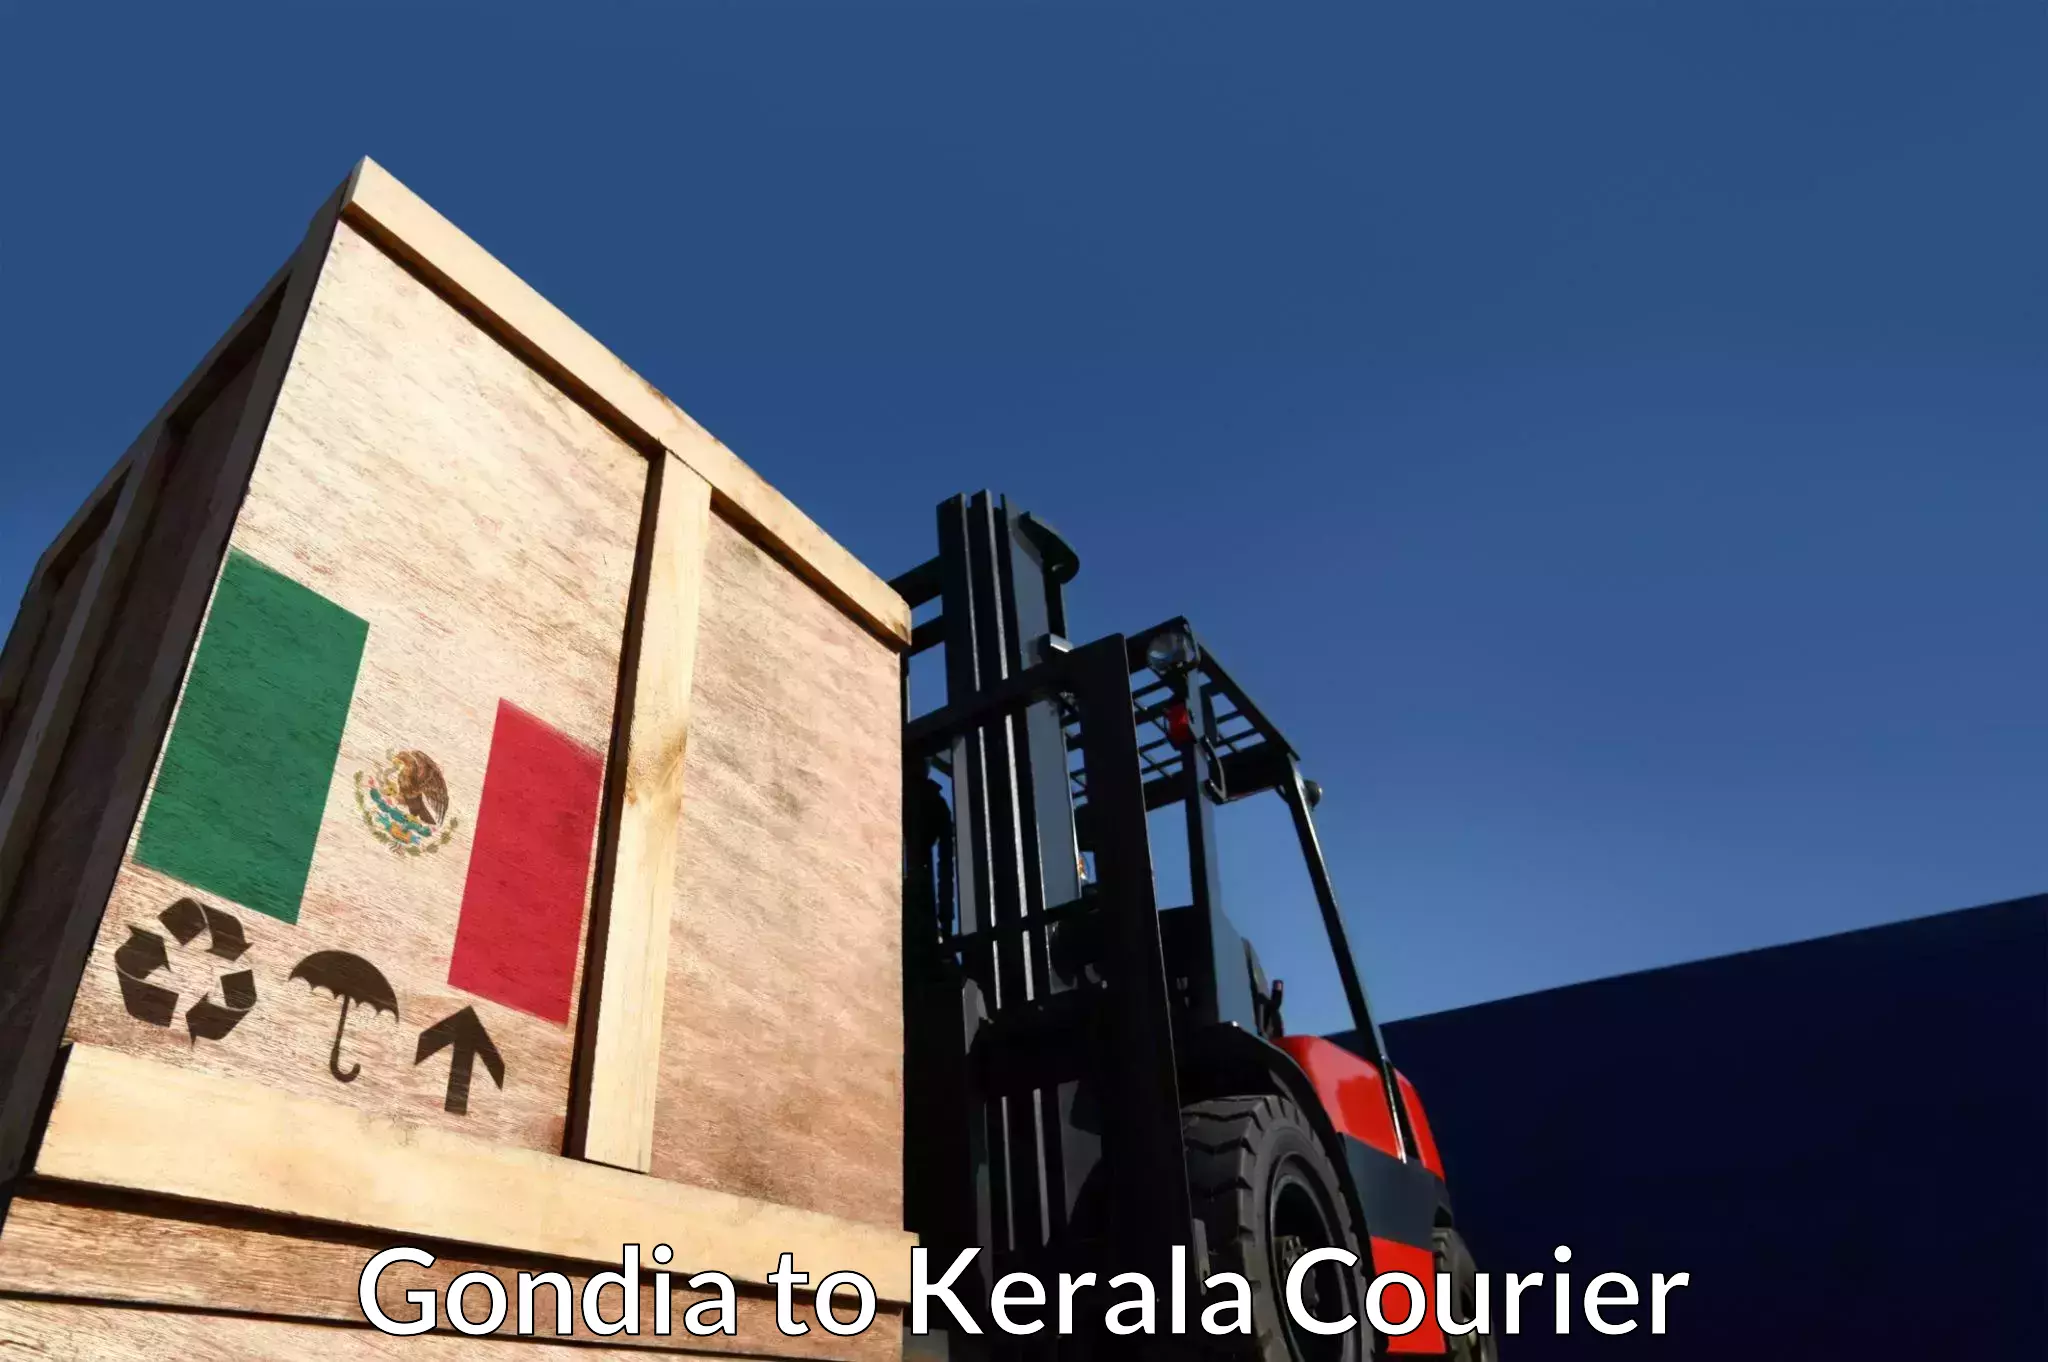 Courier service booking Gondia to Kerala